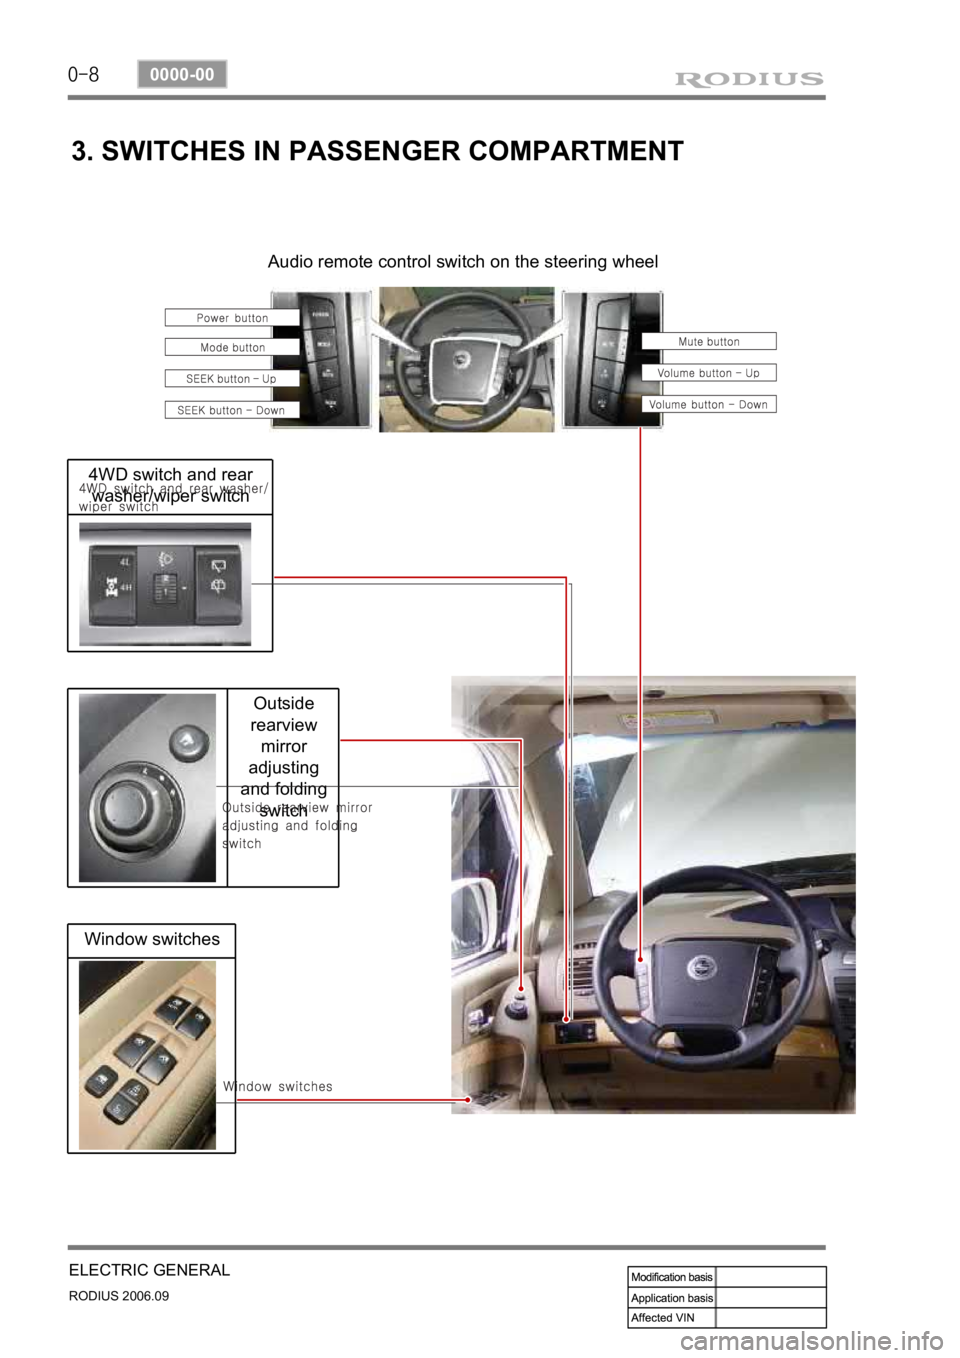 SSANGYONG RODIUS 2007  Service Manual 0-8
RODIUS 2006.09
0000-00
ELECTRIC GENERAL
Window switches
Outside 
rearview 
mirror 
adjusting 
and folding 
switch
4WD switch and rear 
washer/wiper switch
3. SWITCHES IN PASSENGER COMPARTMENT
Audi